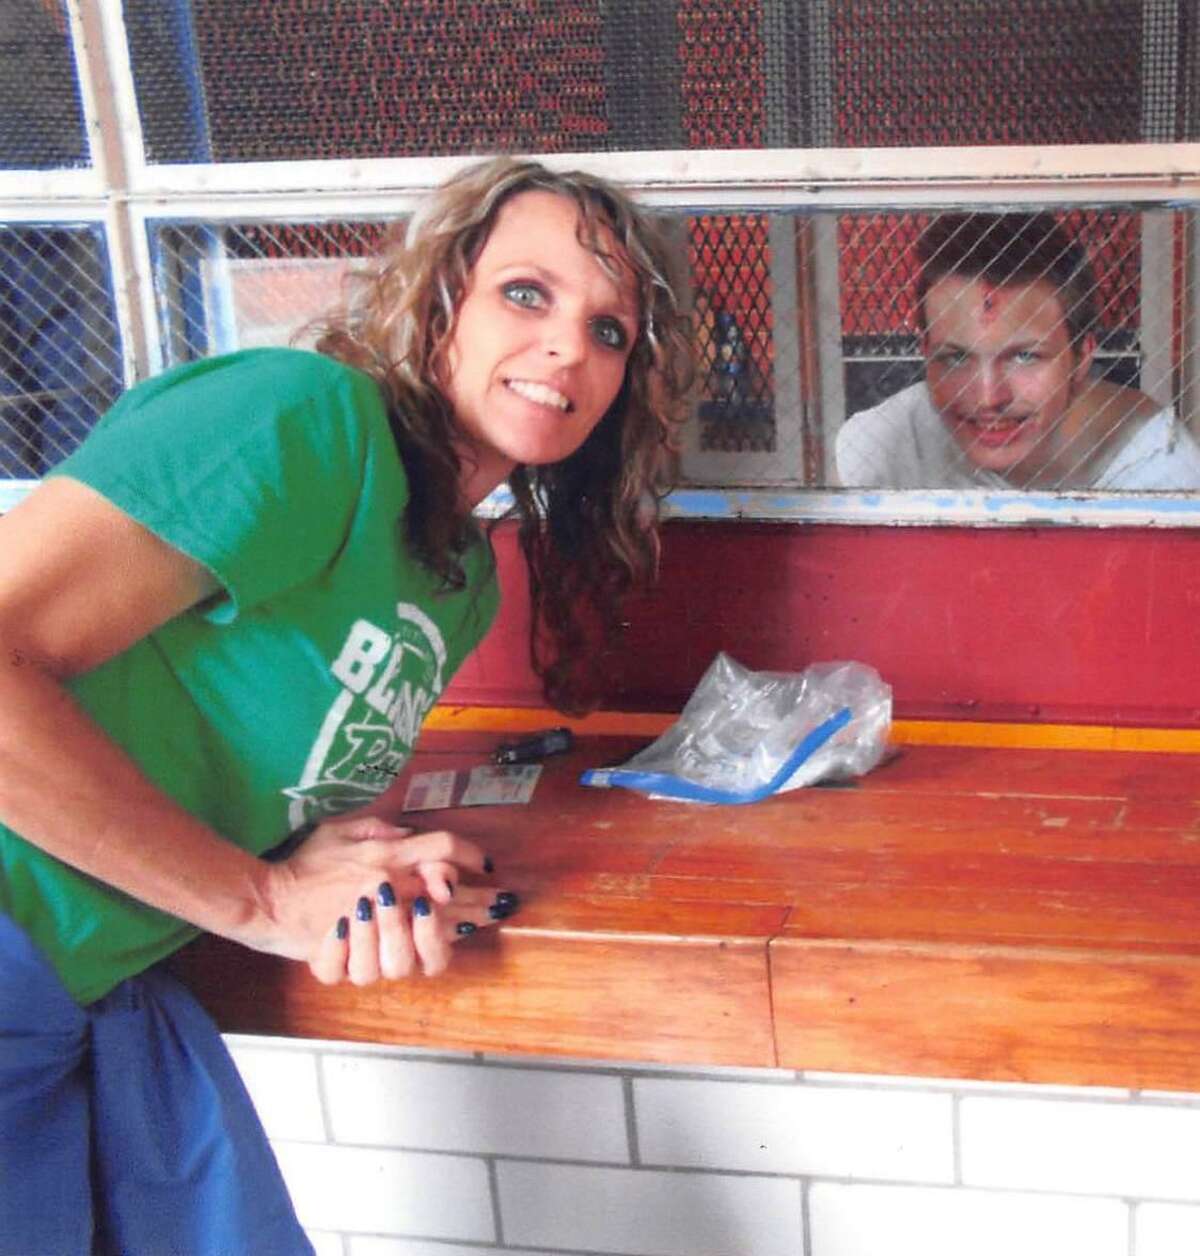 Keri Womack poses with her son Sawyer Letcher, who killed himself while locked up in a Texas prison.